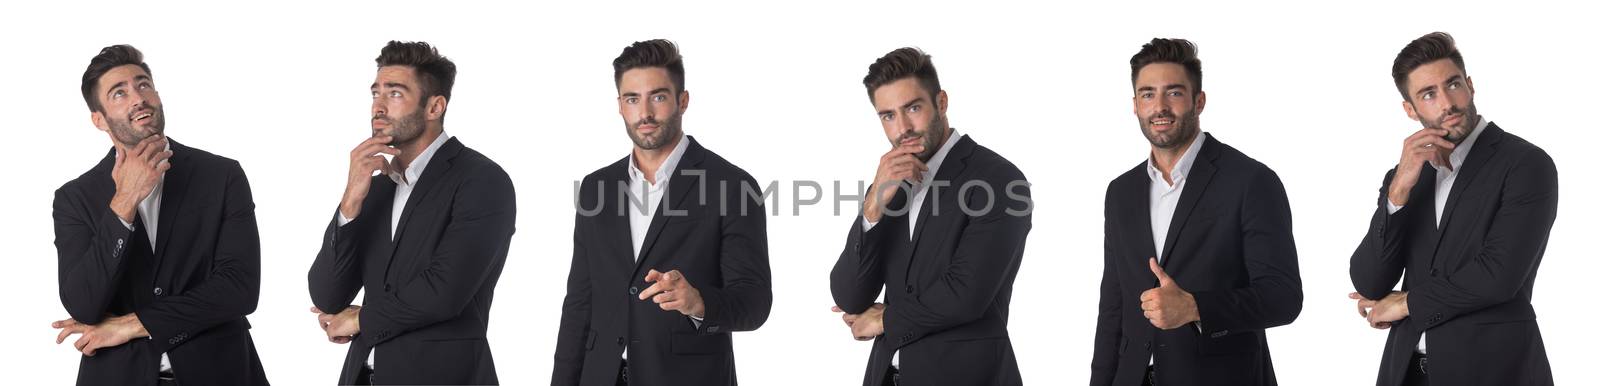 Set of young business man portraits doing different gestures studio isolated on white background